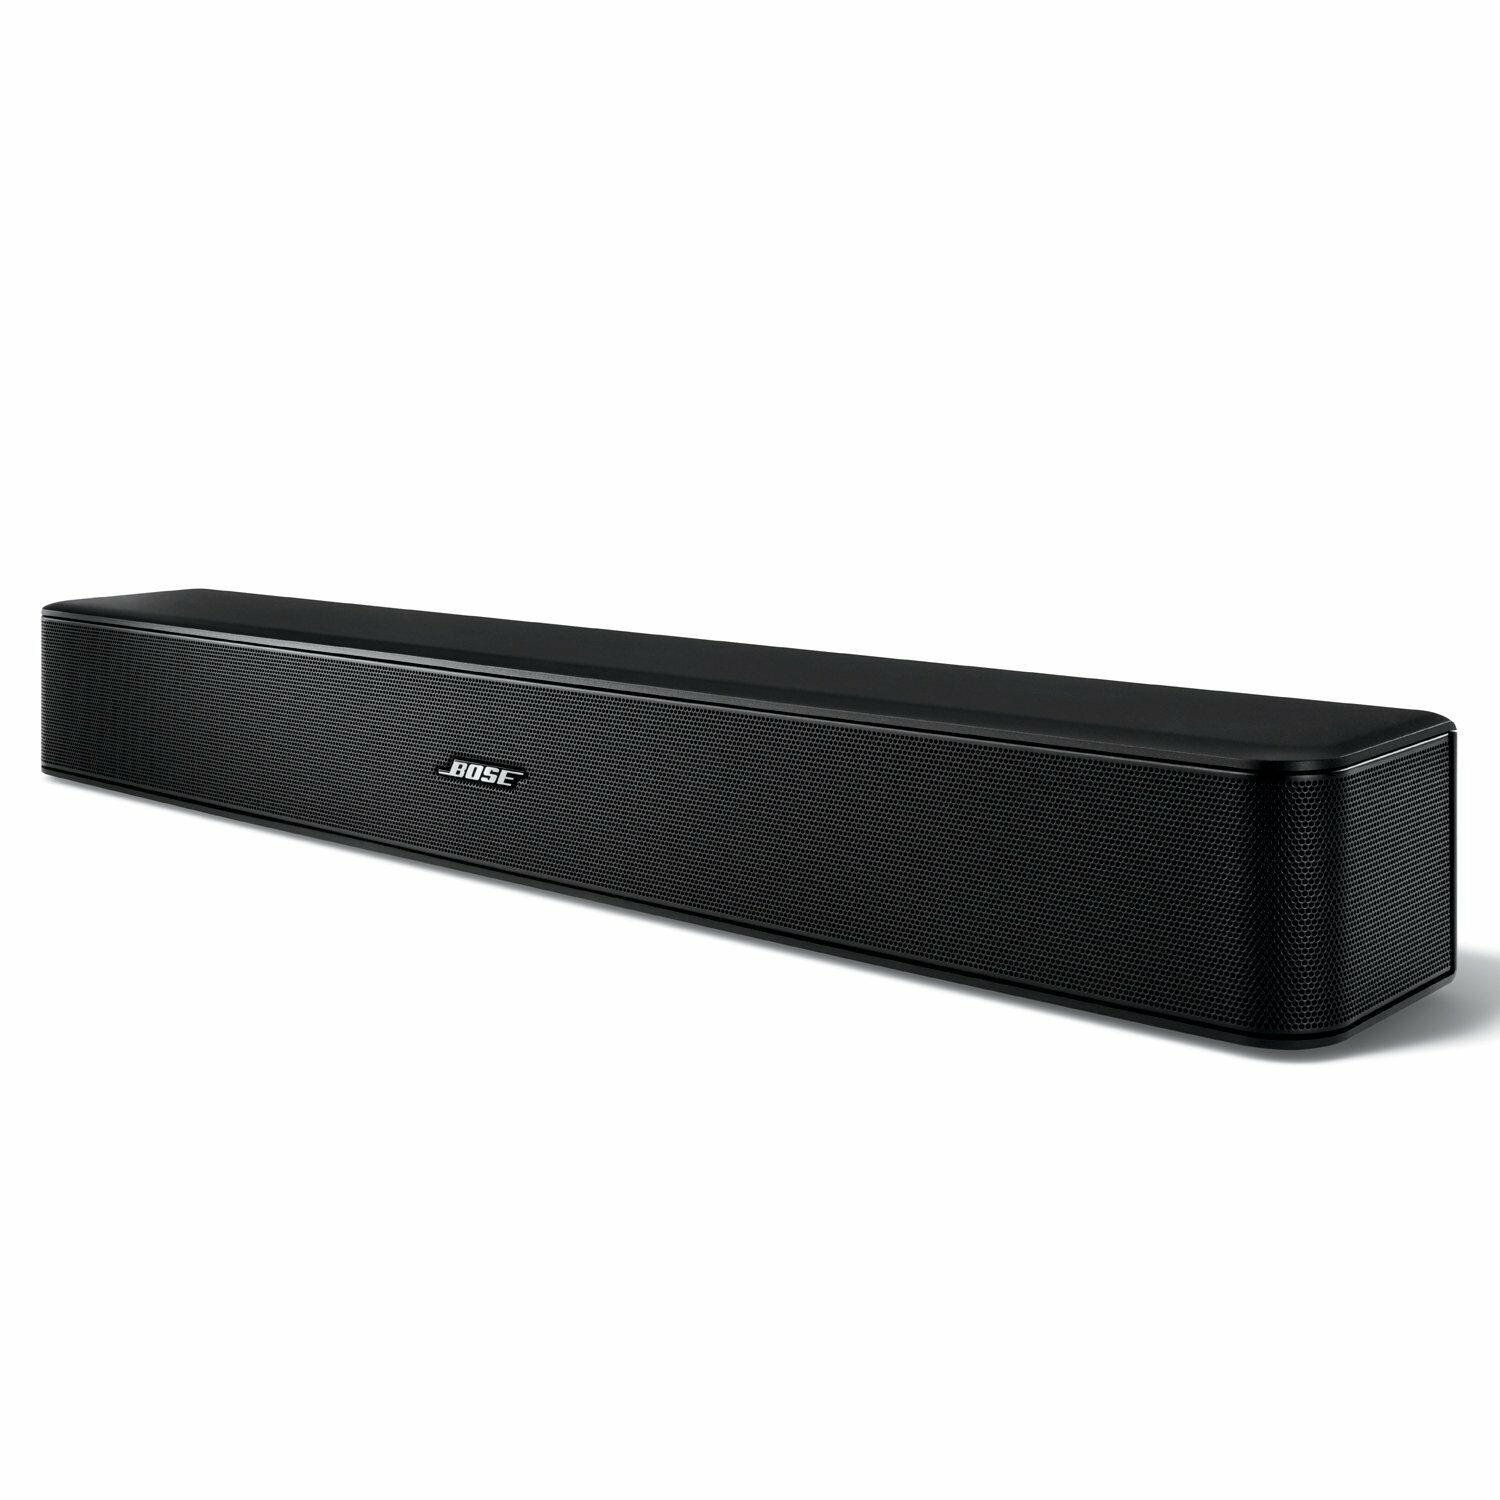 Bose Solo 5 TV Sound System Home Theater, Certified Refurbished